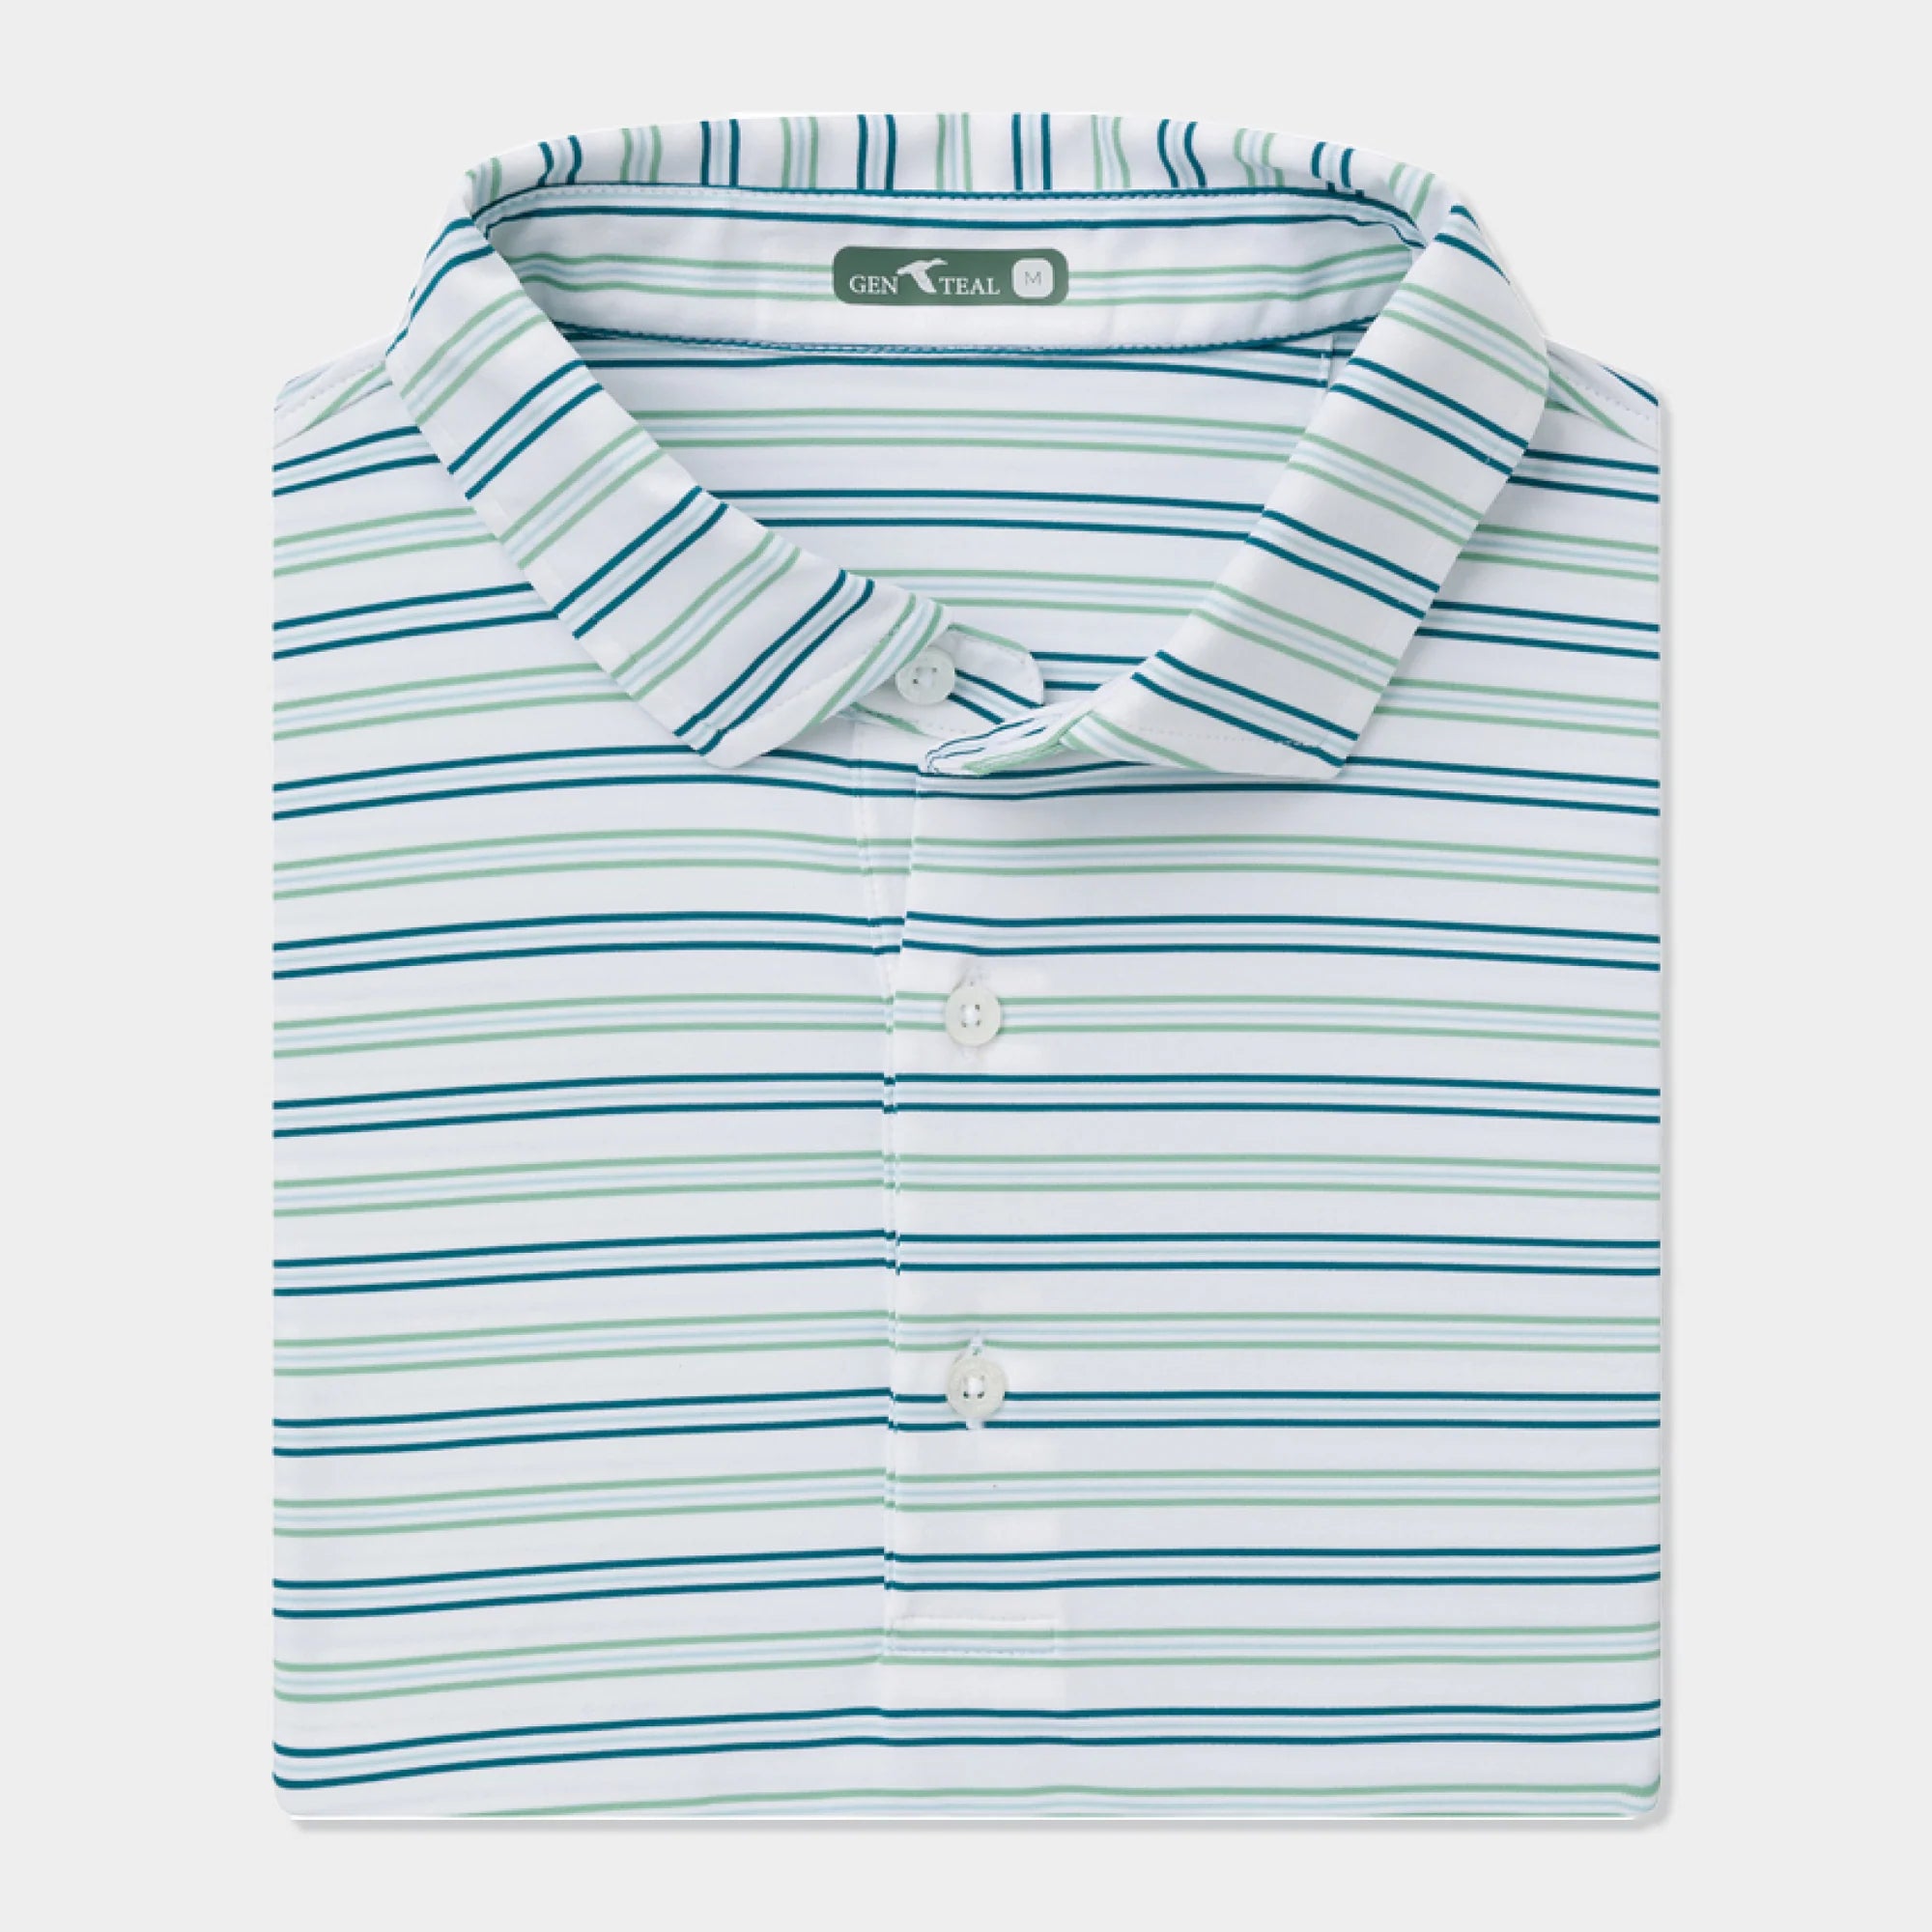 GENTEAL Men's Polo JADEITE / S Genteal Topsail Ecosoft Polo || David's Clothing 4070391